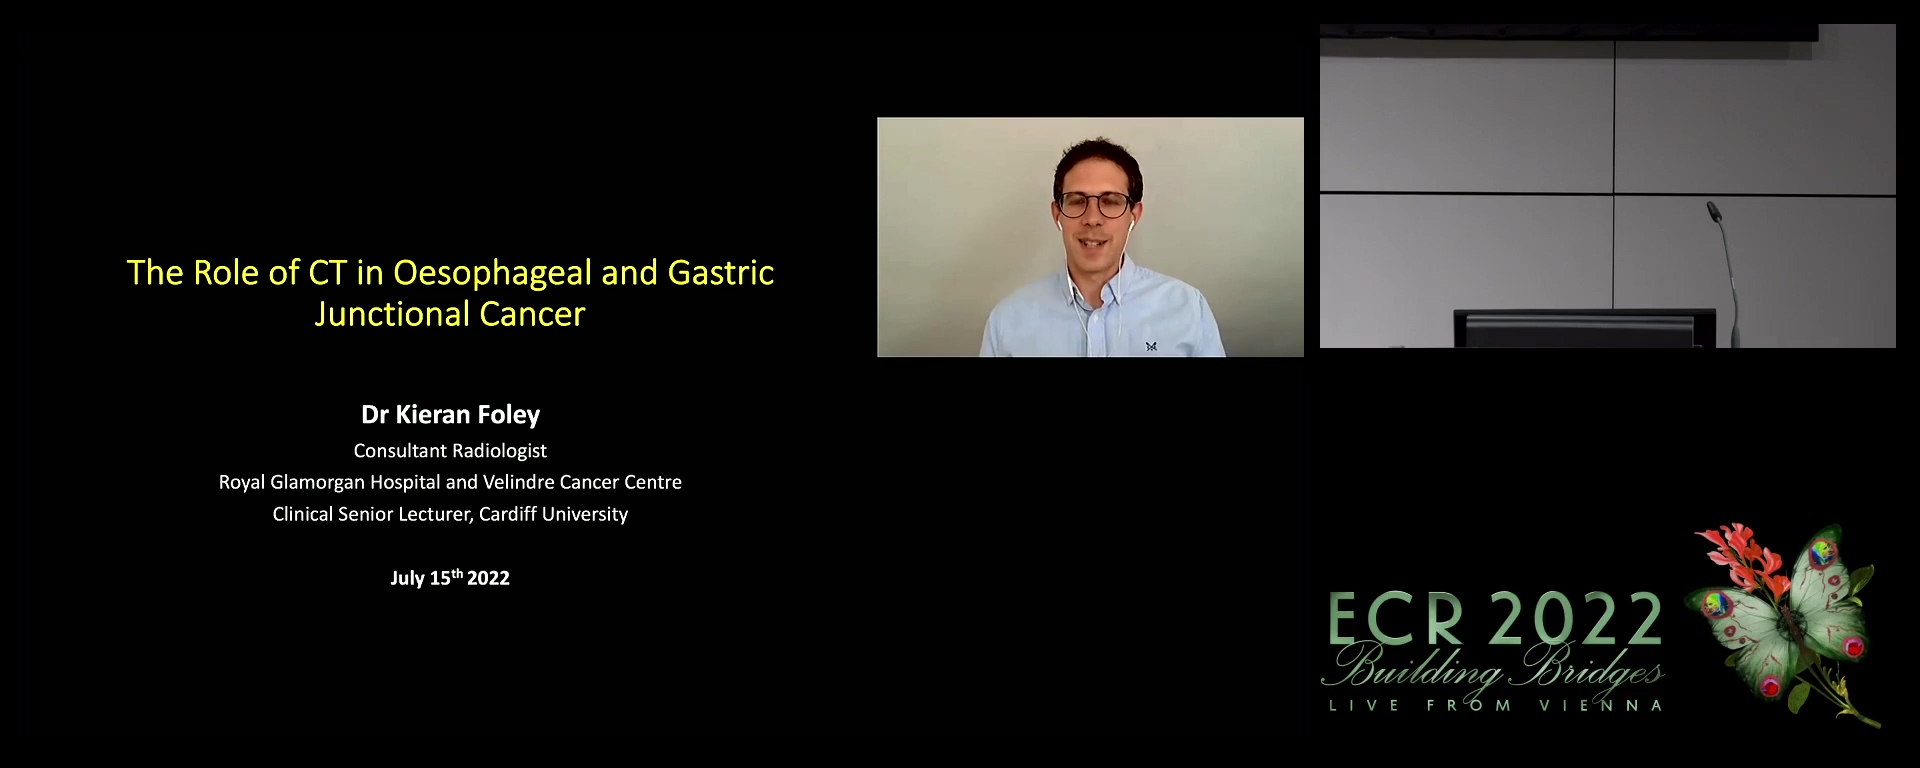 The role of CT in oesophageal and gastric junctional cancer